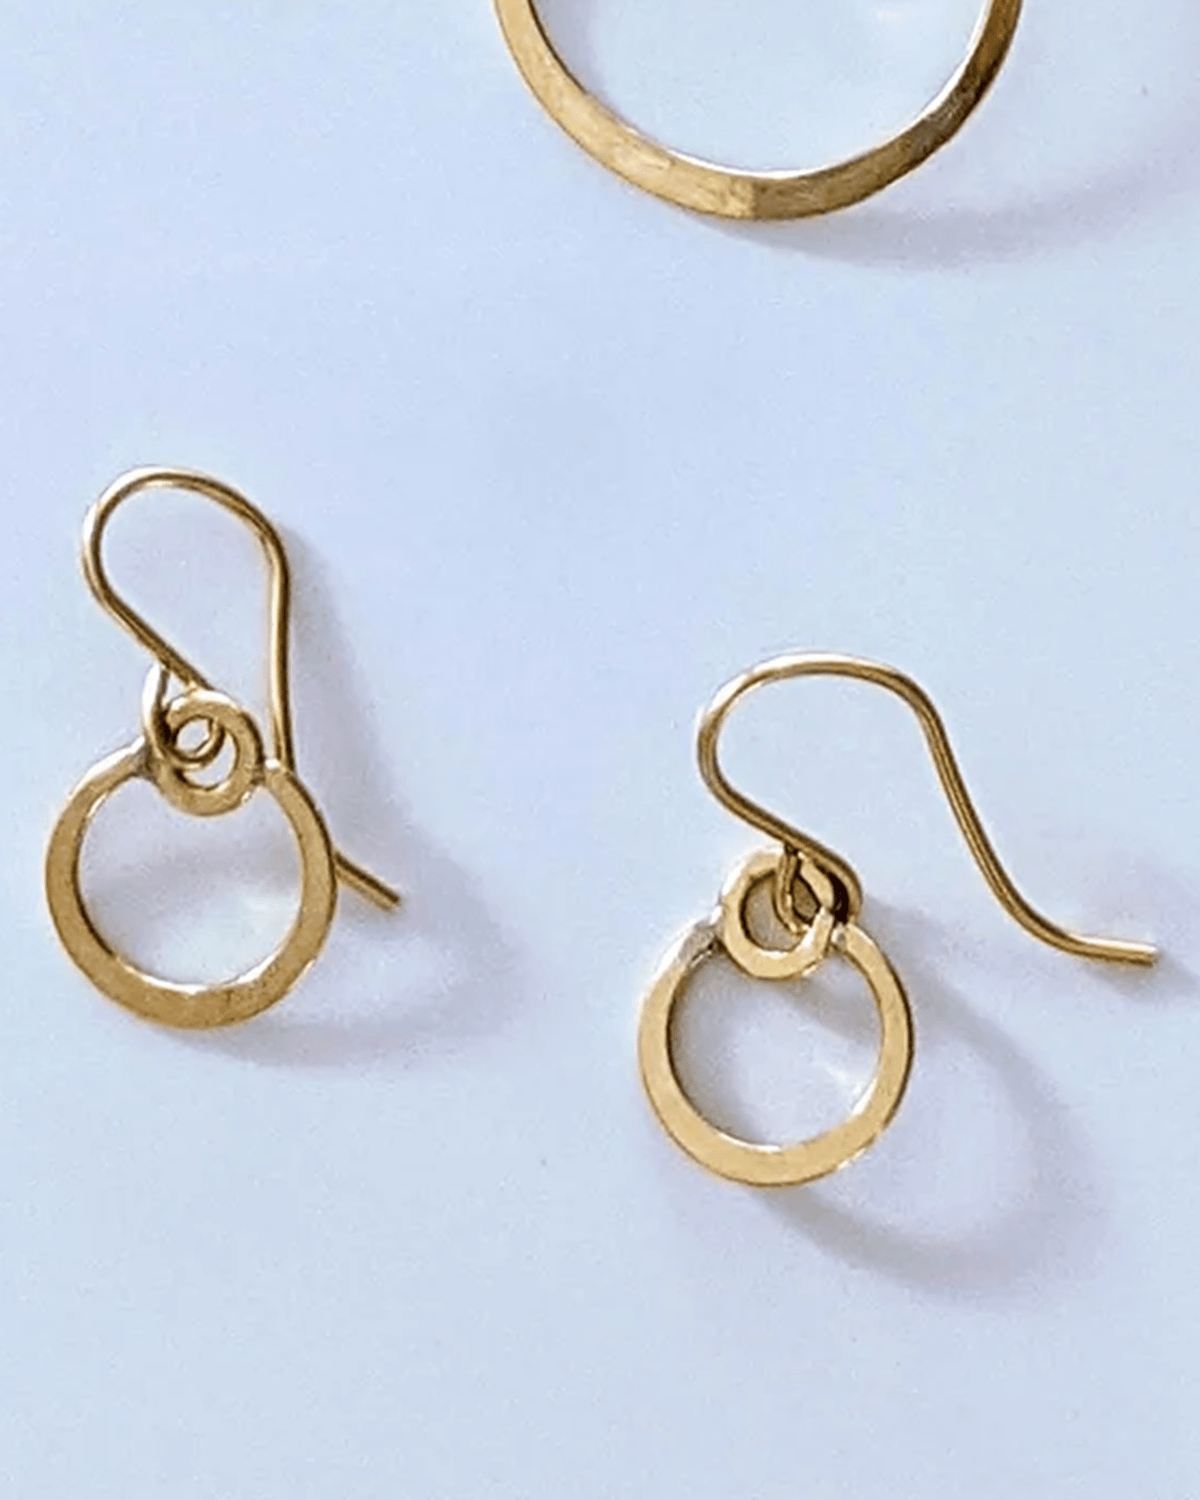 Nashelle Jewelry 14K Gold Fill Muse Circle Earrings, Small in Gold